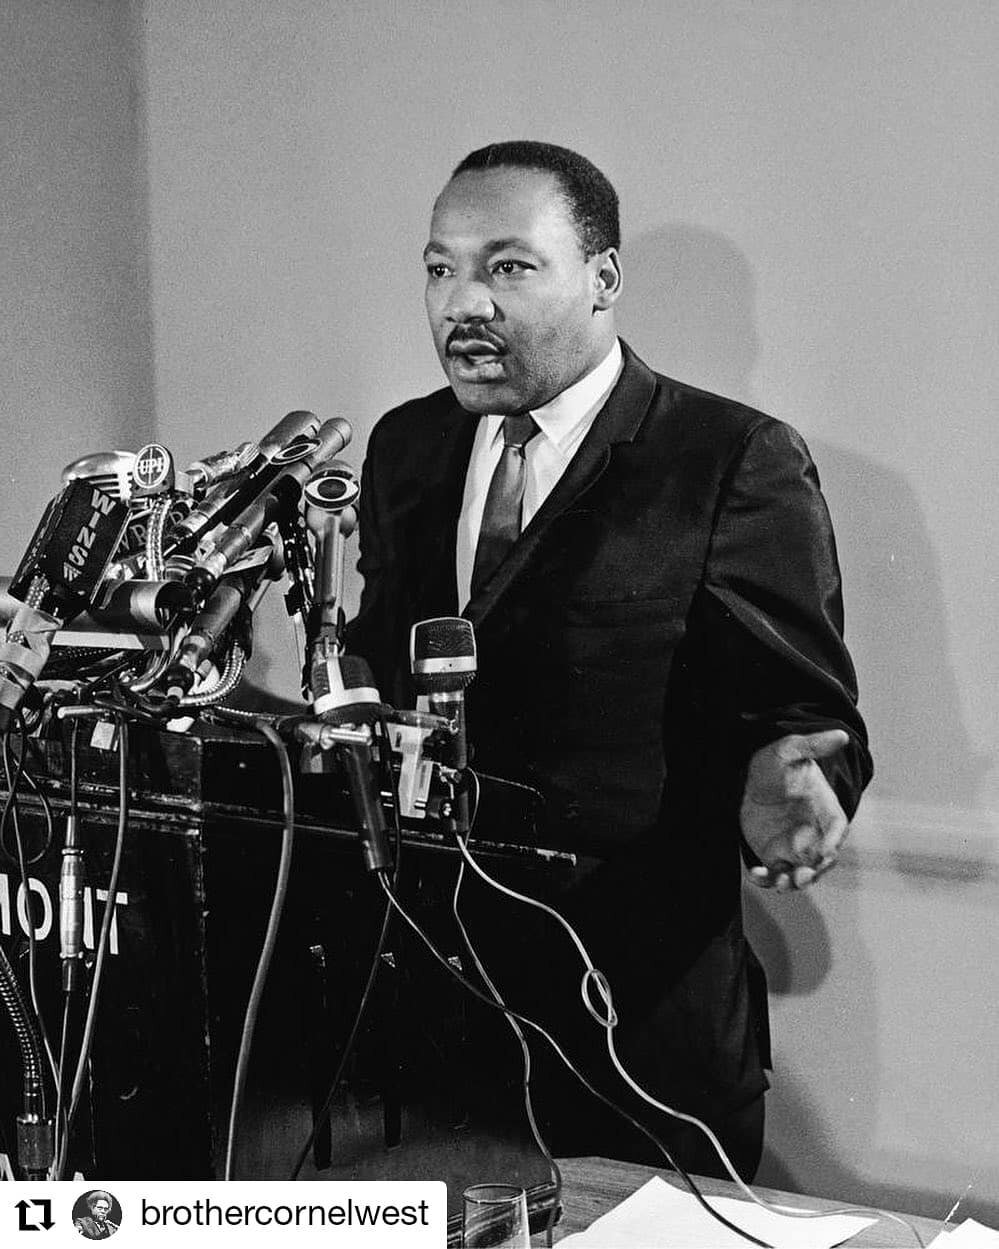 #Repost @brothercornelwest
&bull; &bull; &bull; &bull; &bull; &bull;
Today we remember Dr. Martin Luther King Jr. However, he did predict, &ldquo;I am nevertheless greatly saddened&hellip;that the inquirers have not really known me, my commitment or 